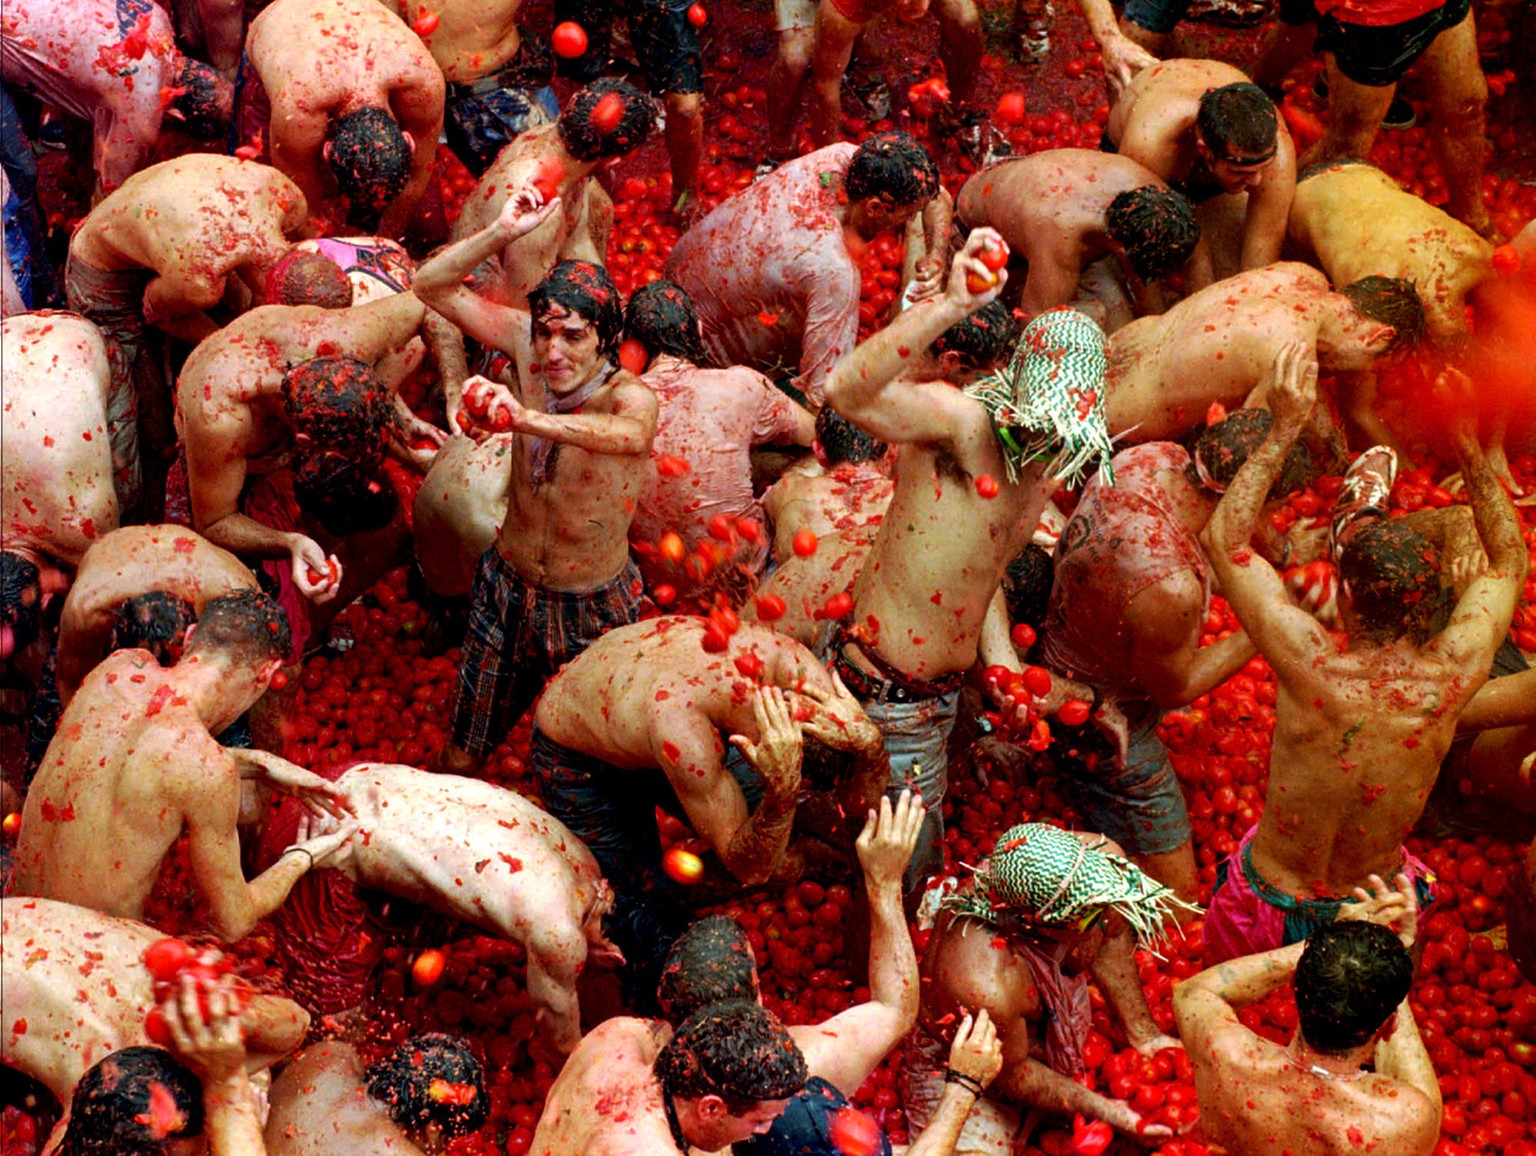 Festival goers pelt each other with tomatoes in the eastern Spanish town of Bunol Wednesday, August 28, 1996 during the annual &quot;Tomatina&quot; festival in which about 100 tons of tomatoes are emp ...